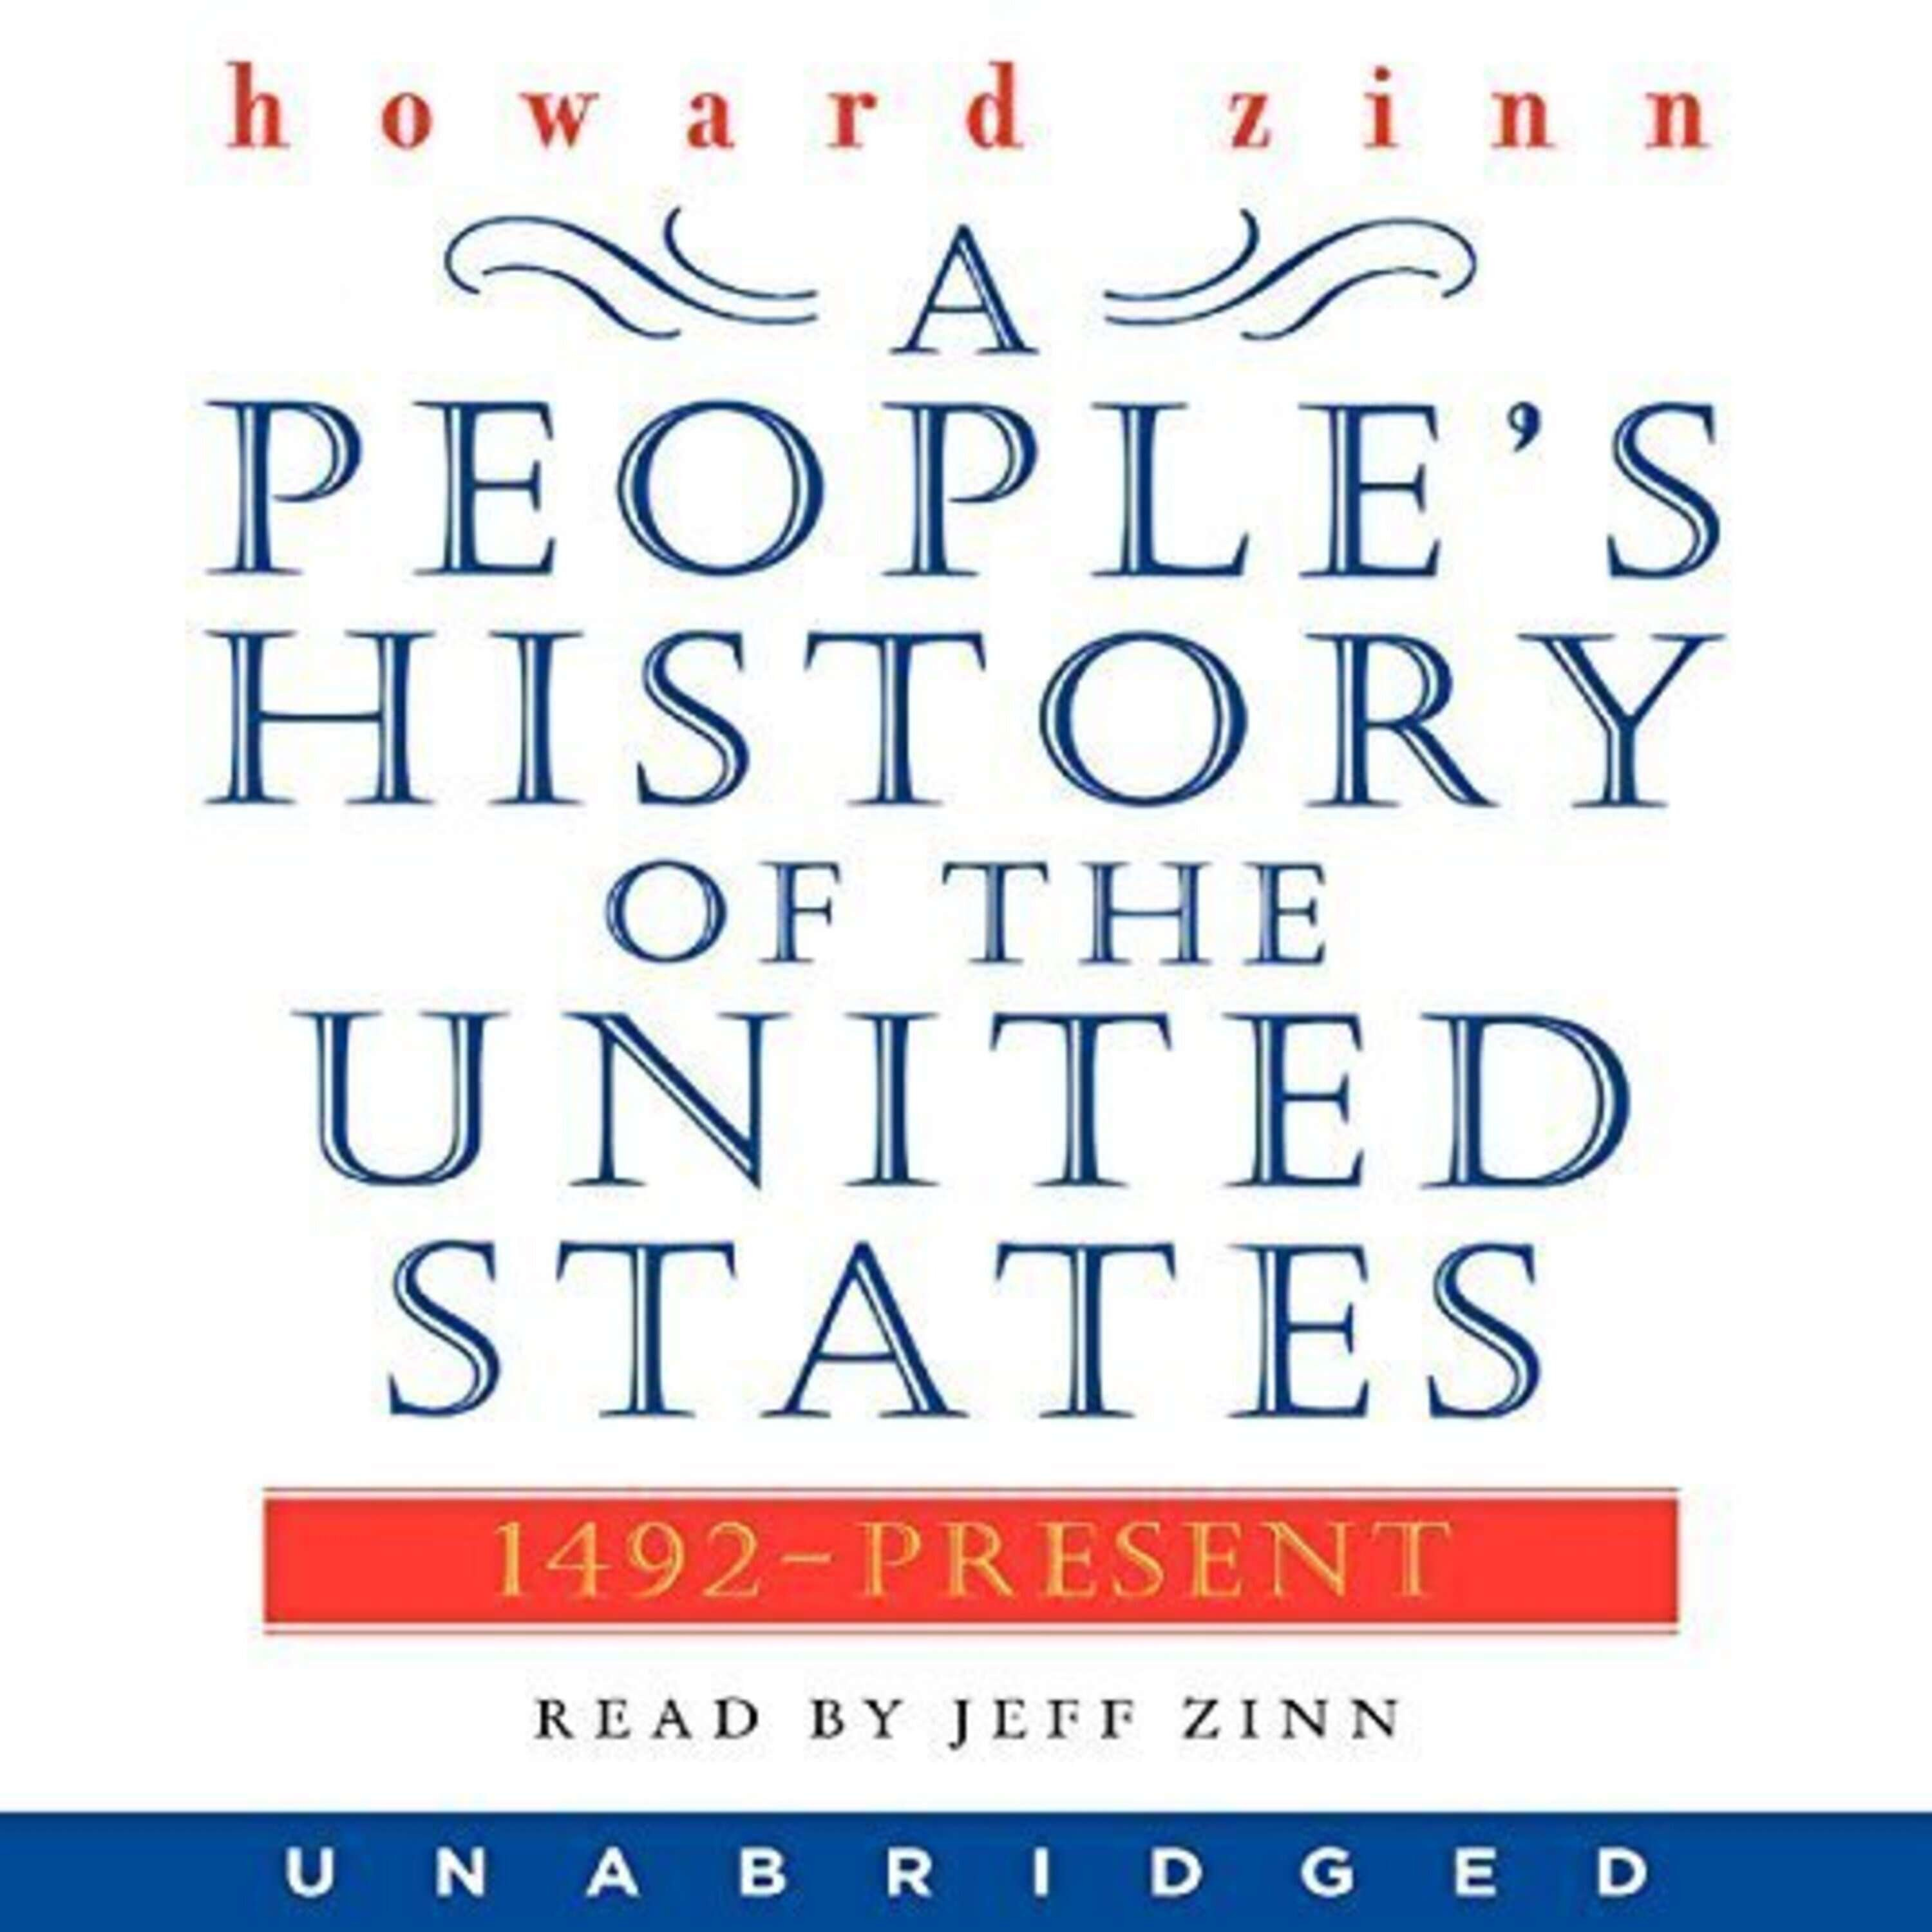 Part One - A People’s History of the United States; Howard Zinn